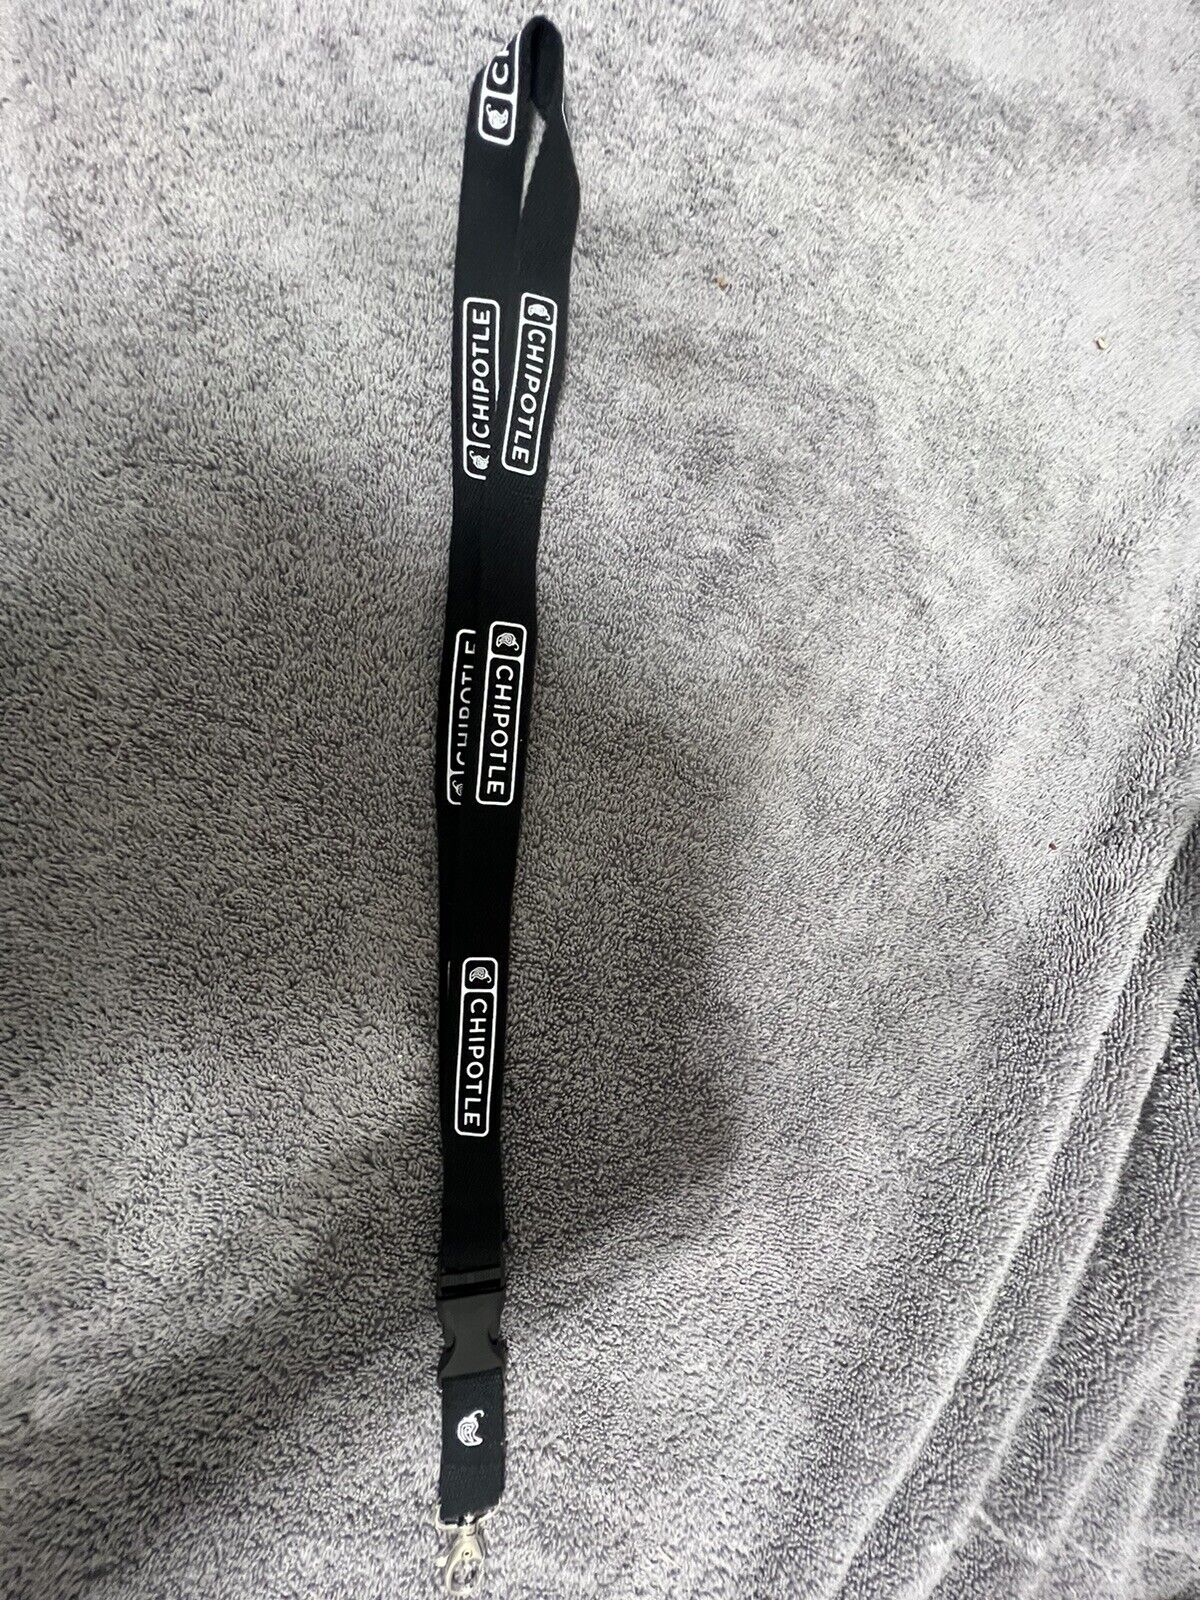 Chipotle Mexican Grill Lanyard